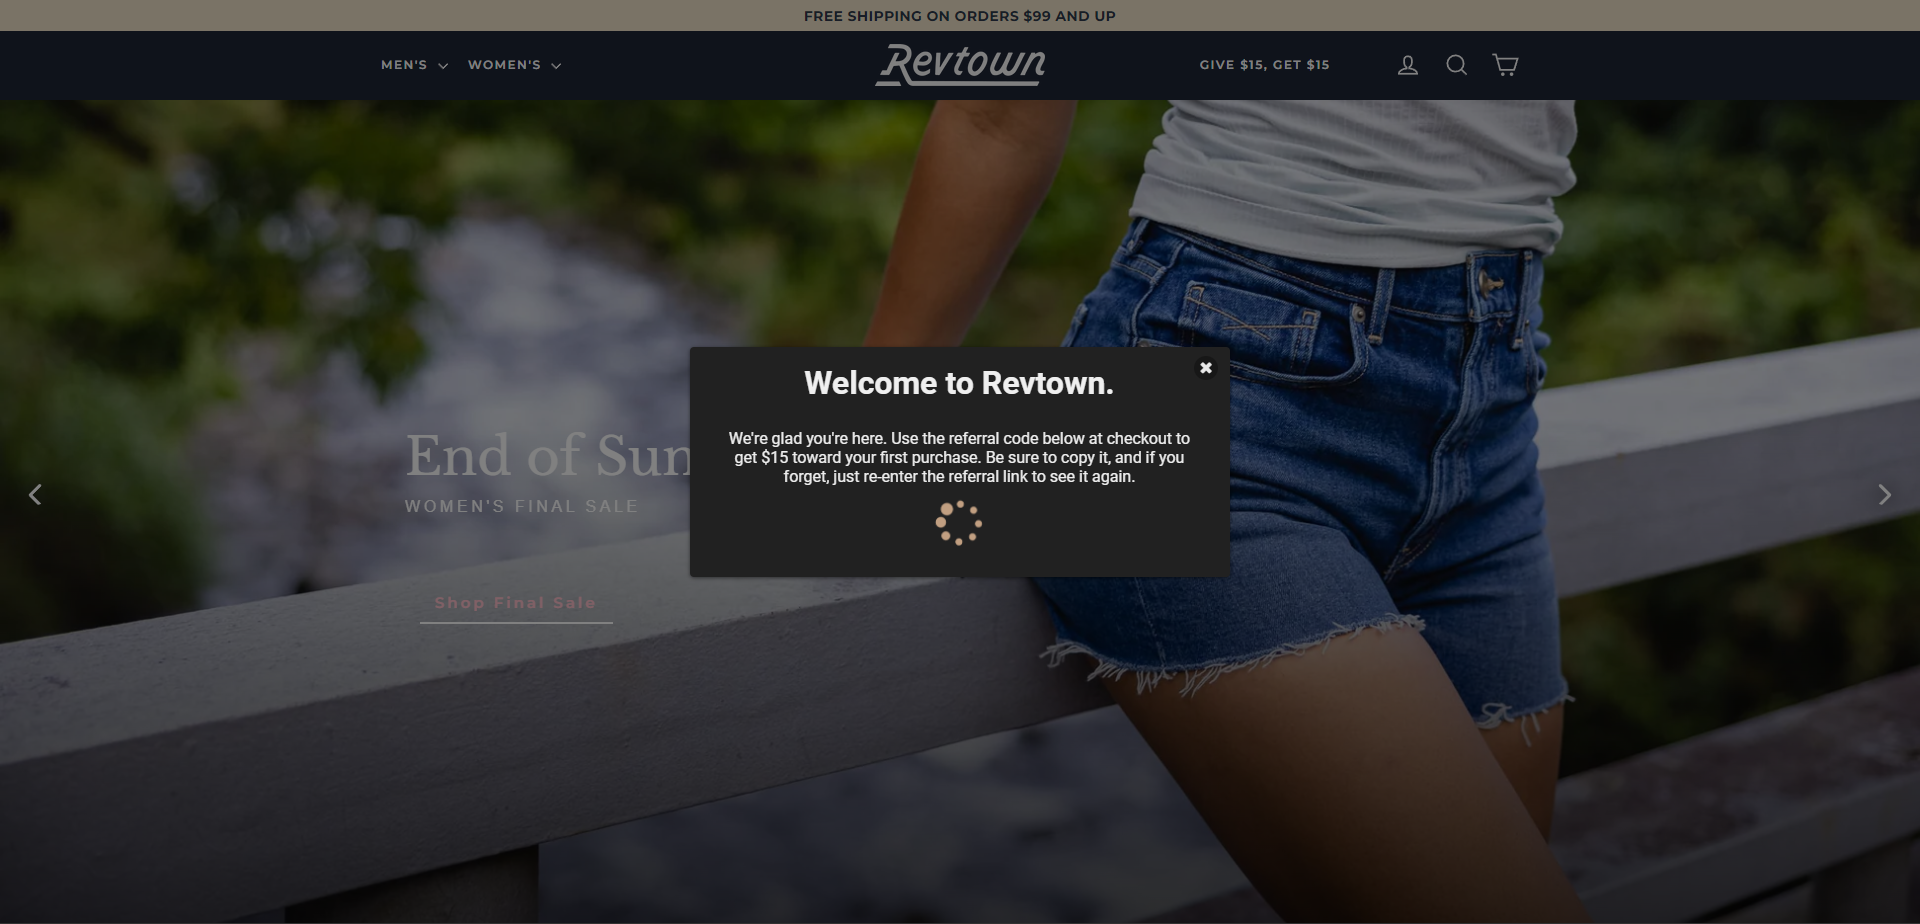 Landing Page for Revtown